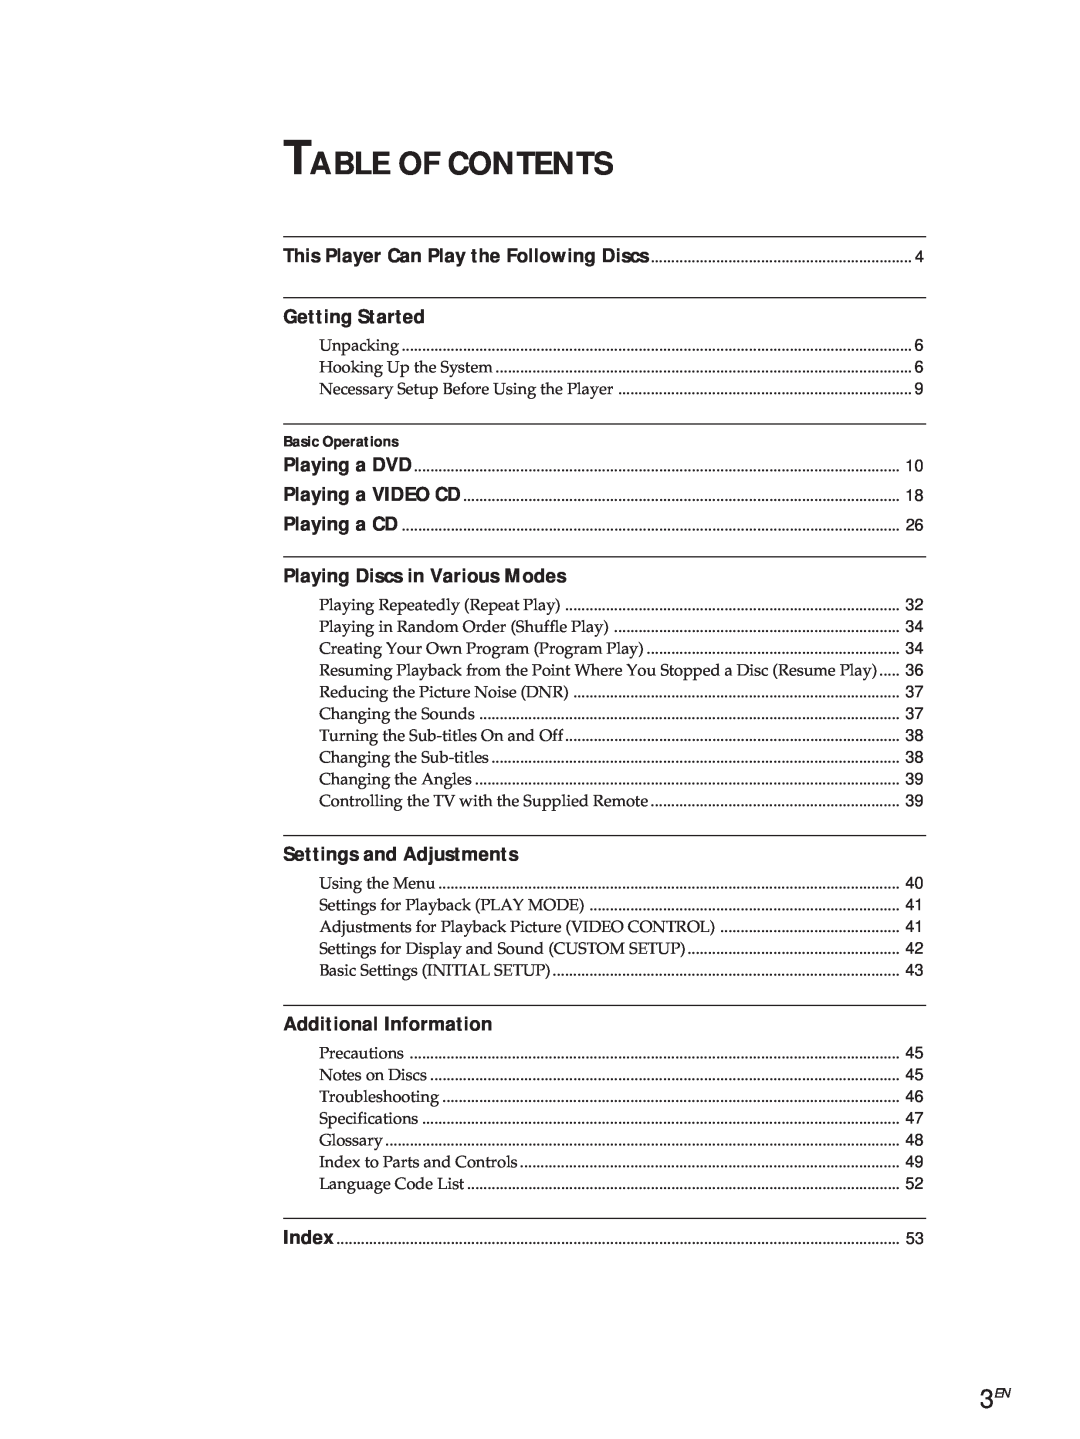 Sony DVP3980 manual Table Of Contents, Getting Started, Playing Discs in Various Modes, Settings and Adjustments 